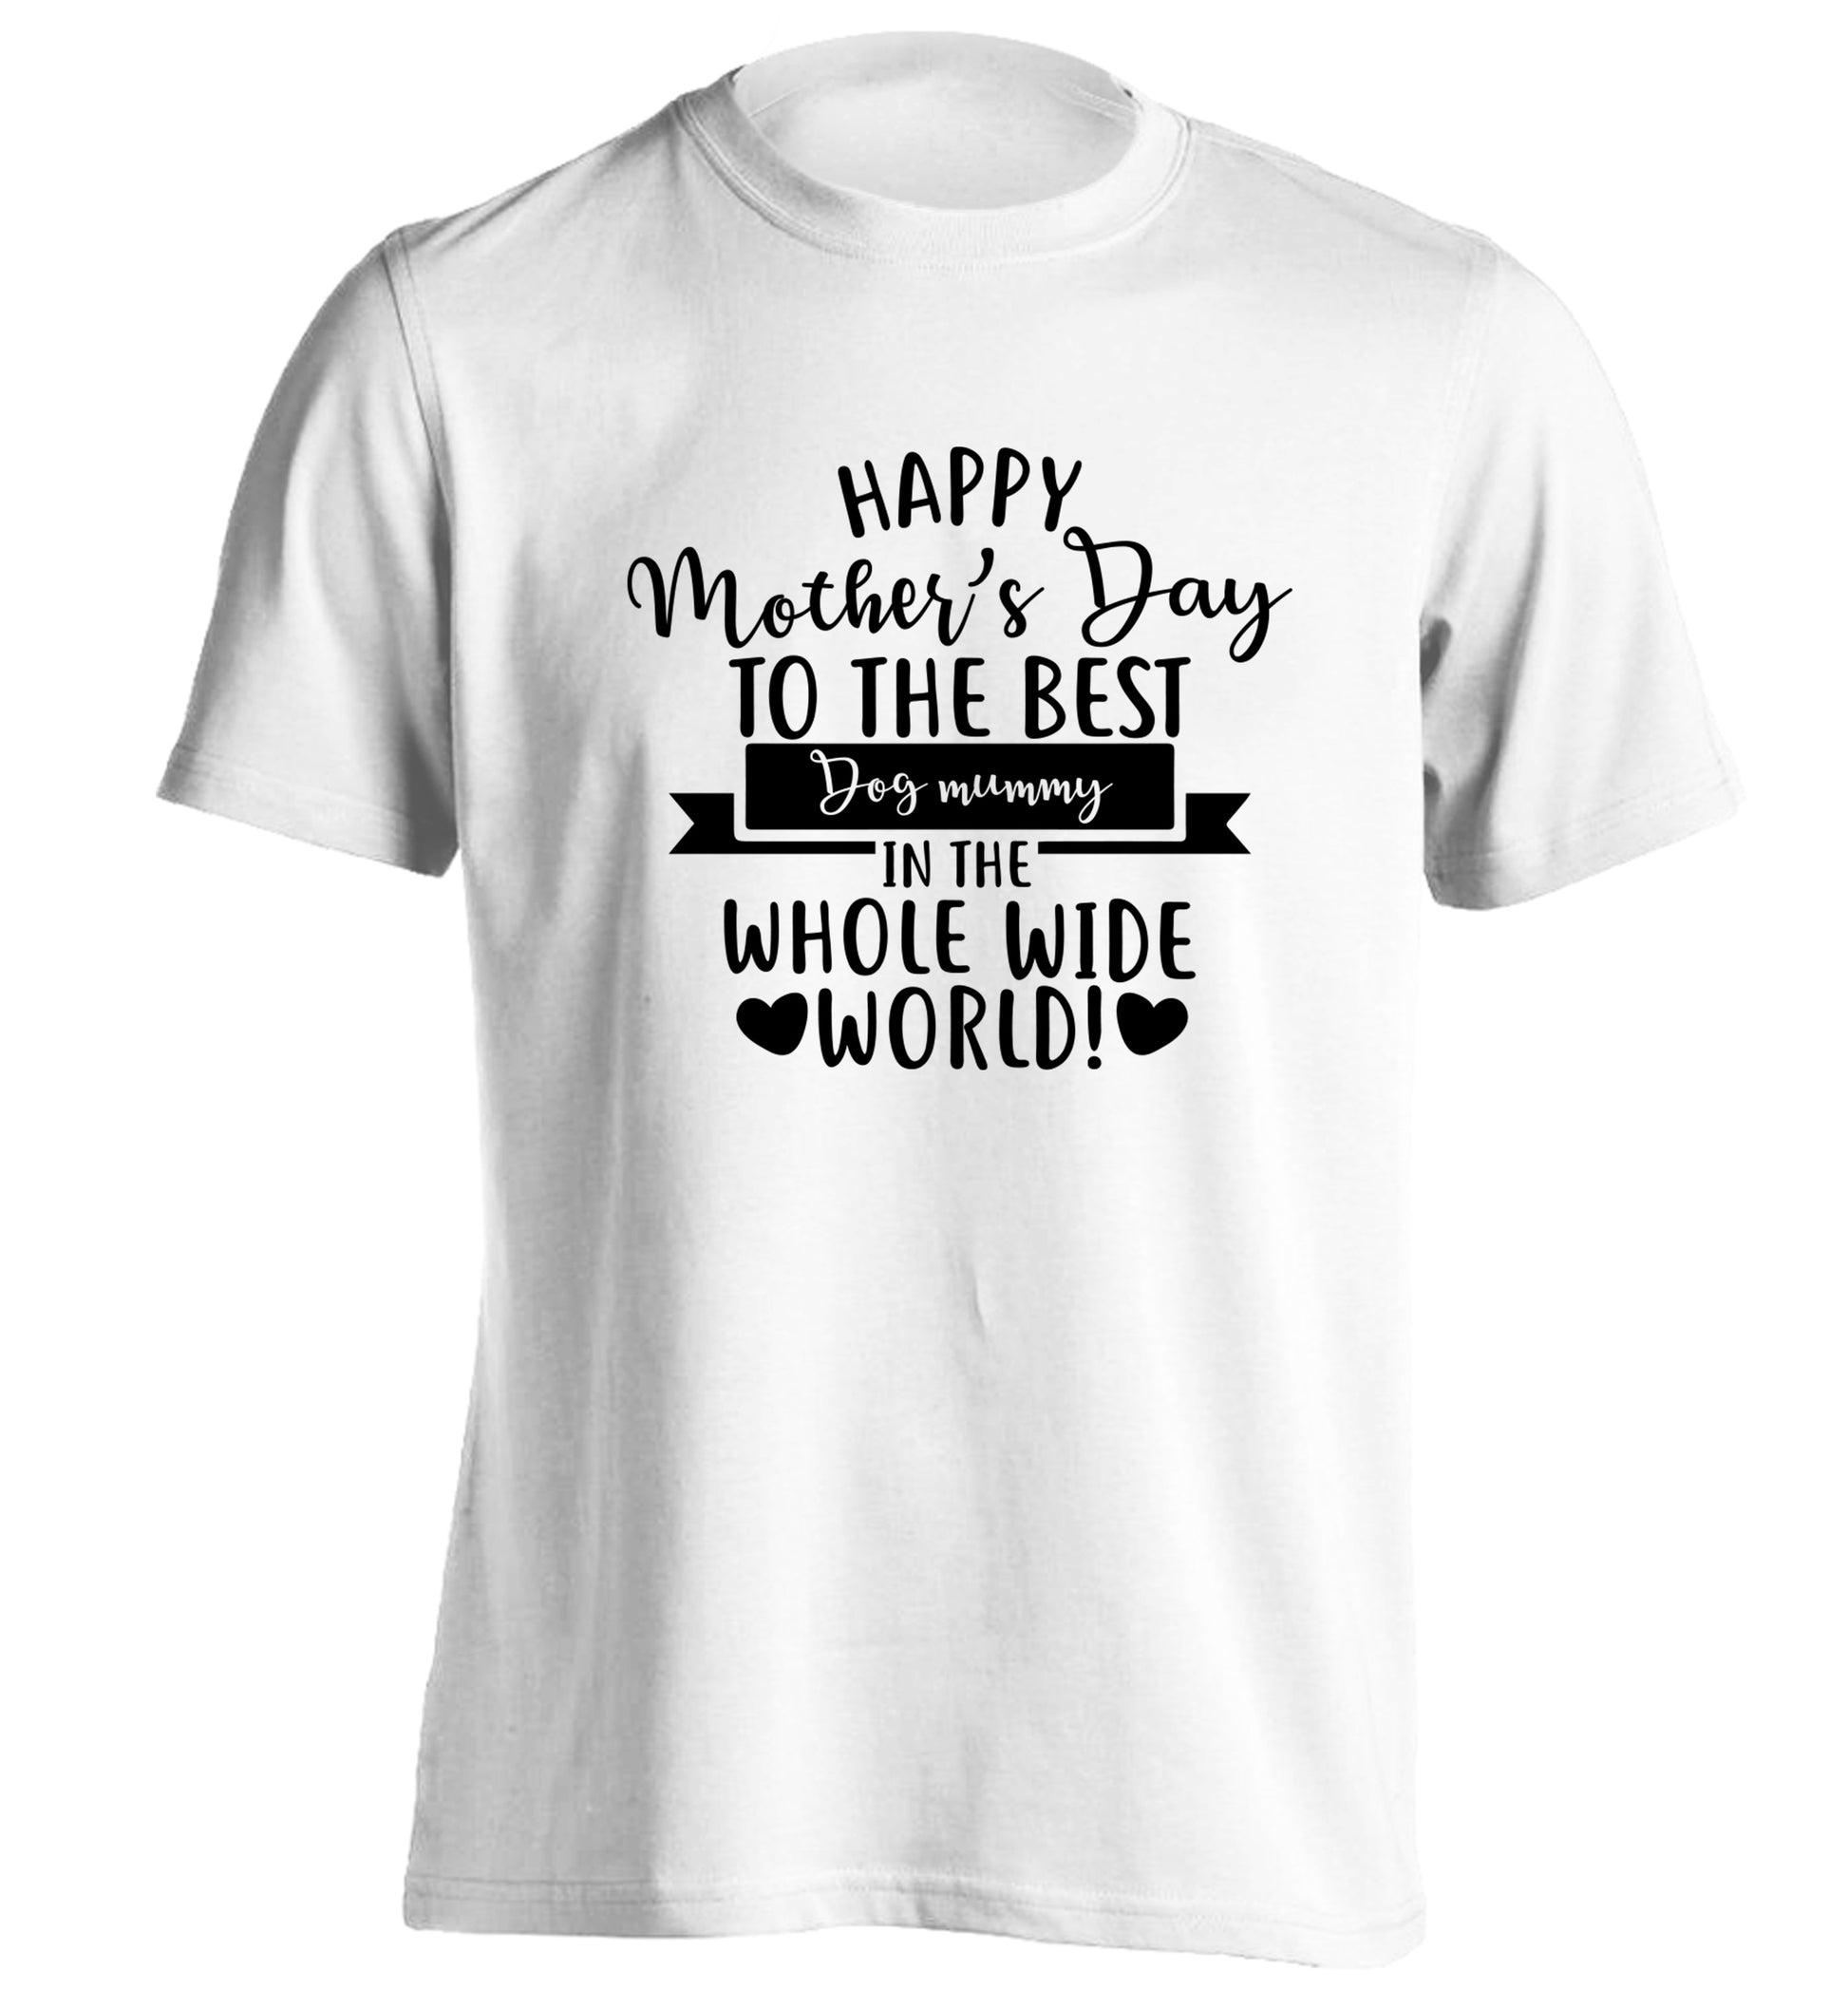 Happy mother's day to the best dog mummy in the world adults unisex white Tshirt 2XL